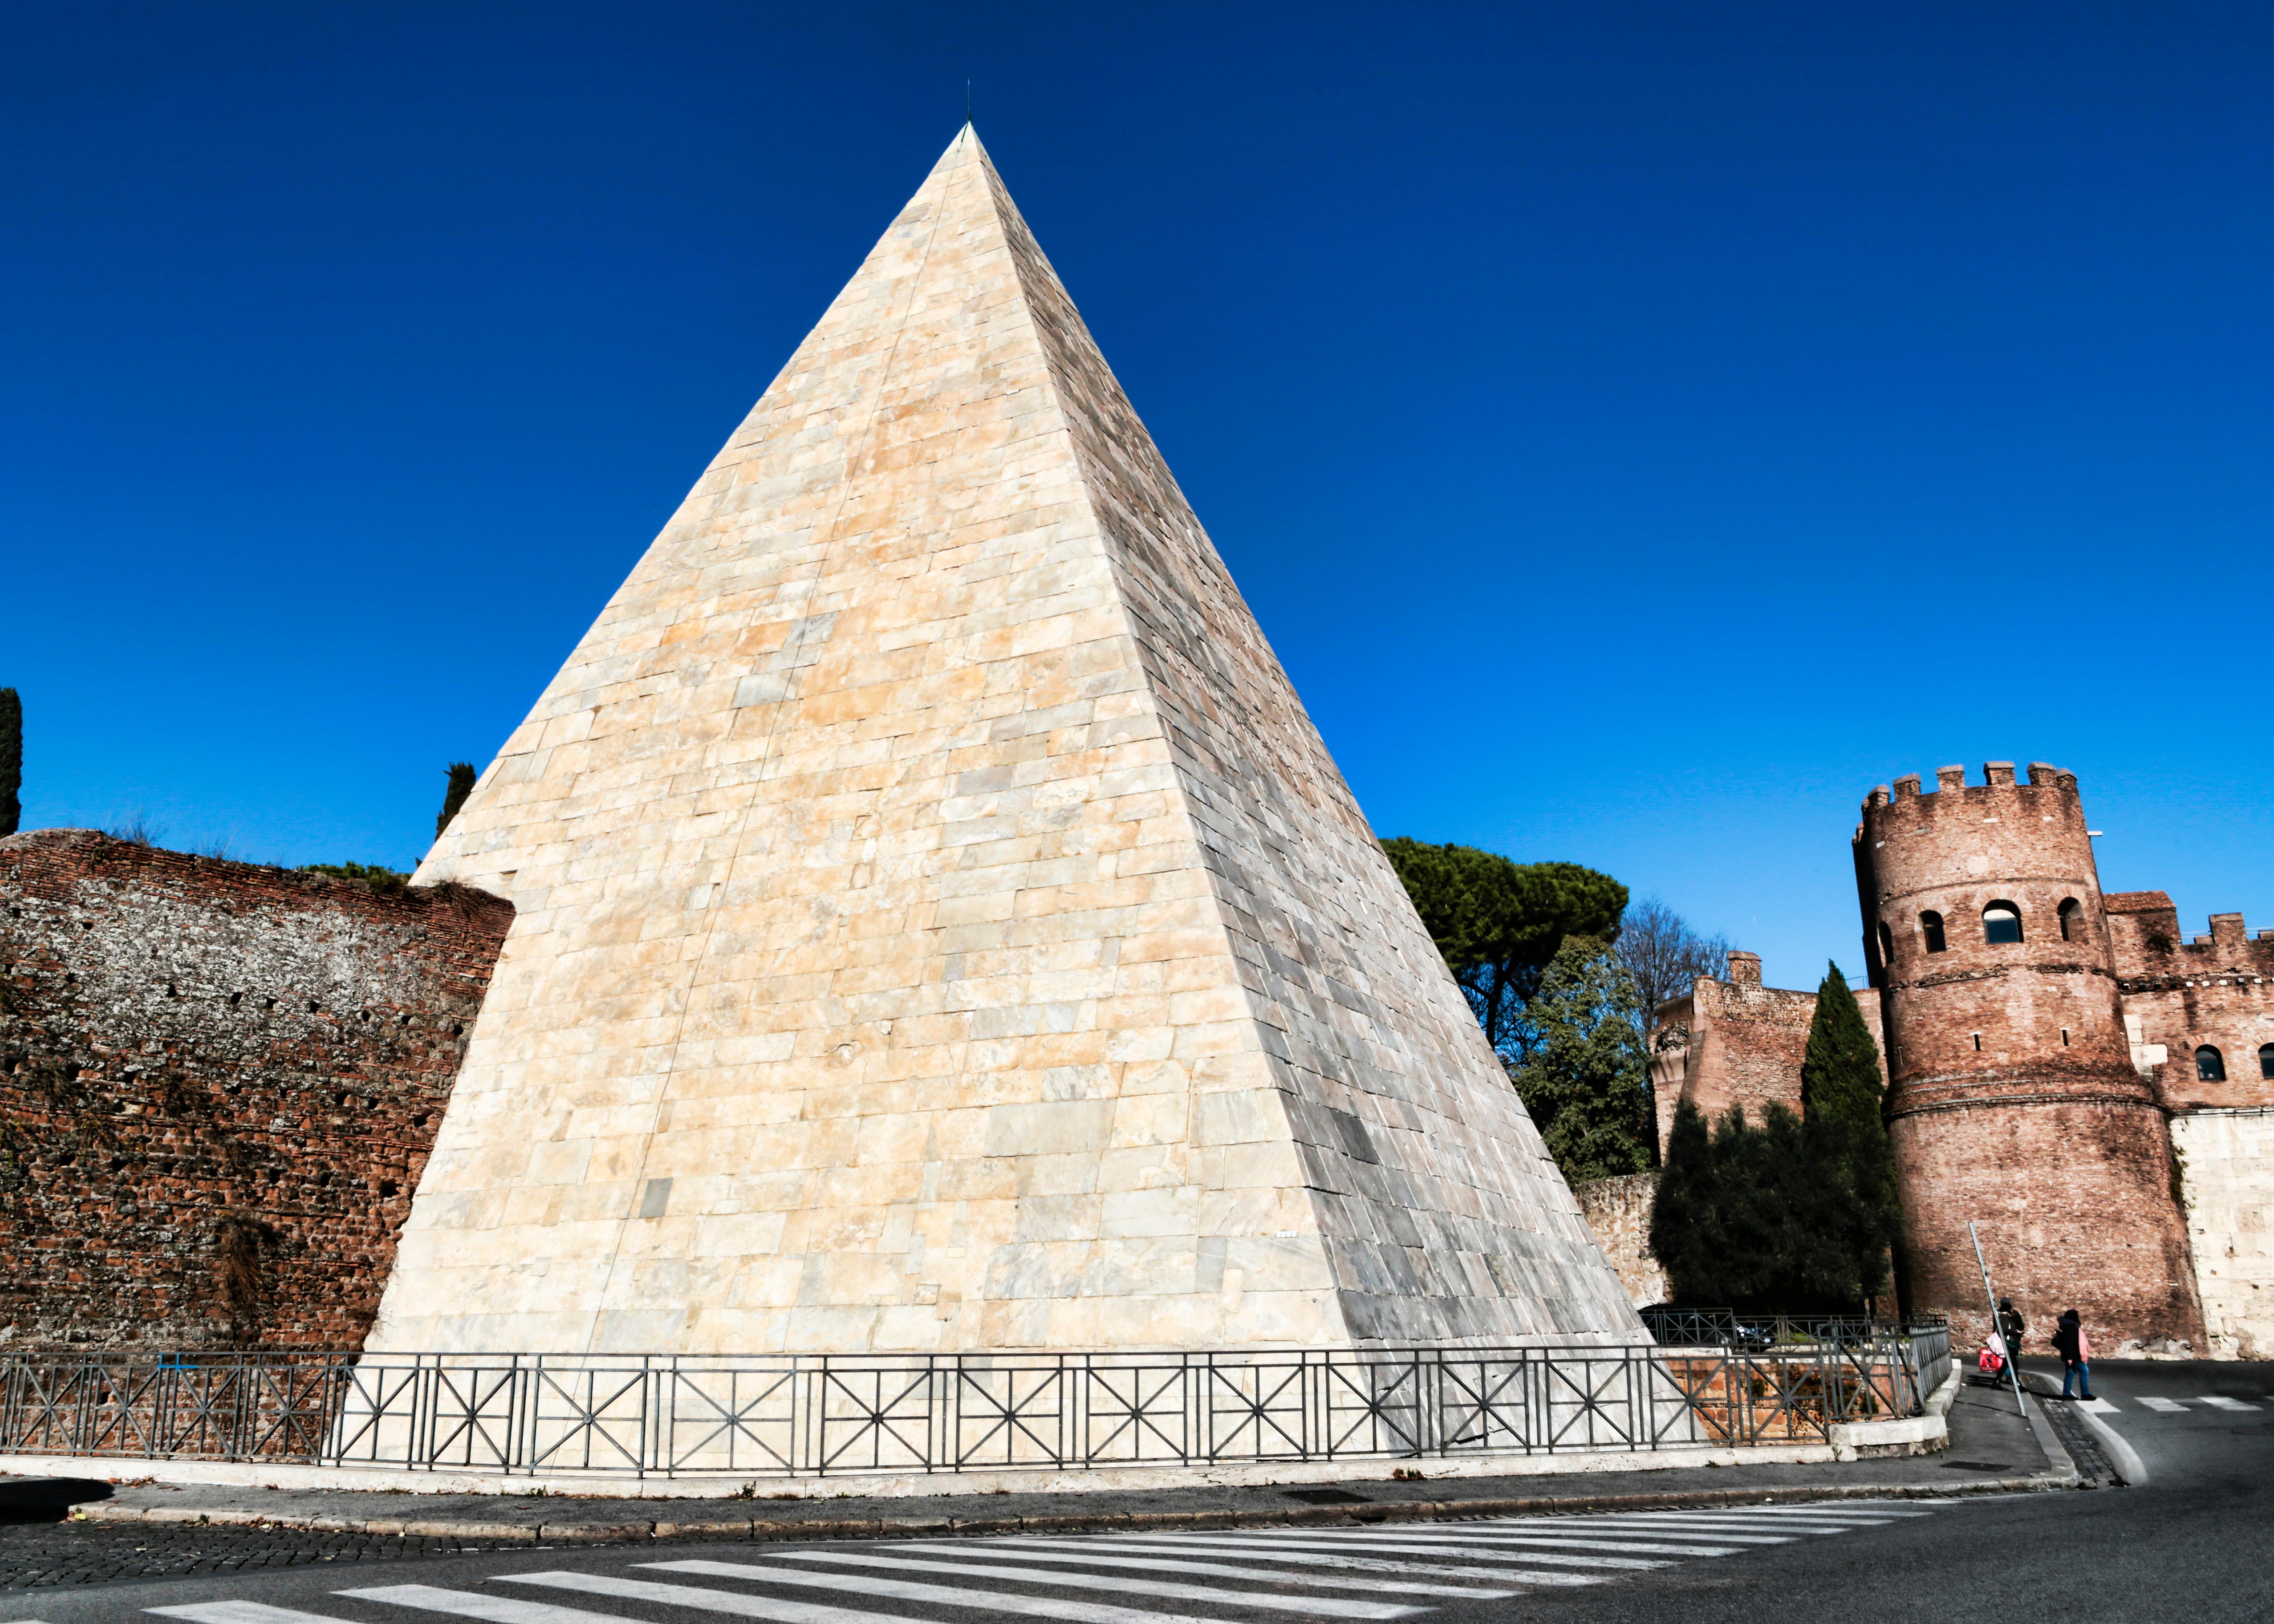 Rome street view of the Pyramid of Cestius seen from Ostiense Square